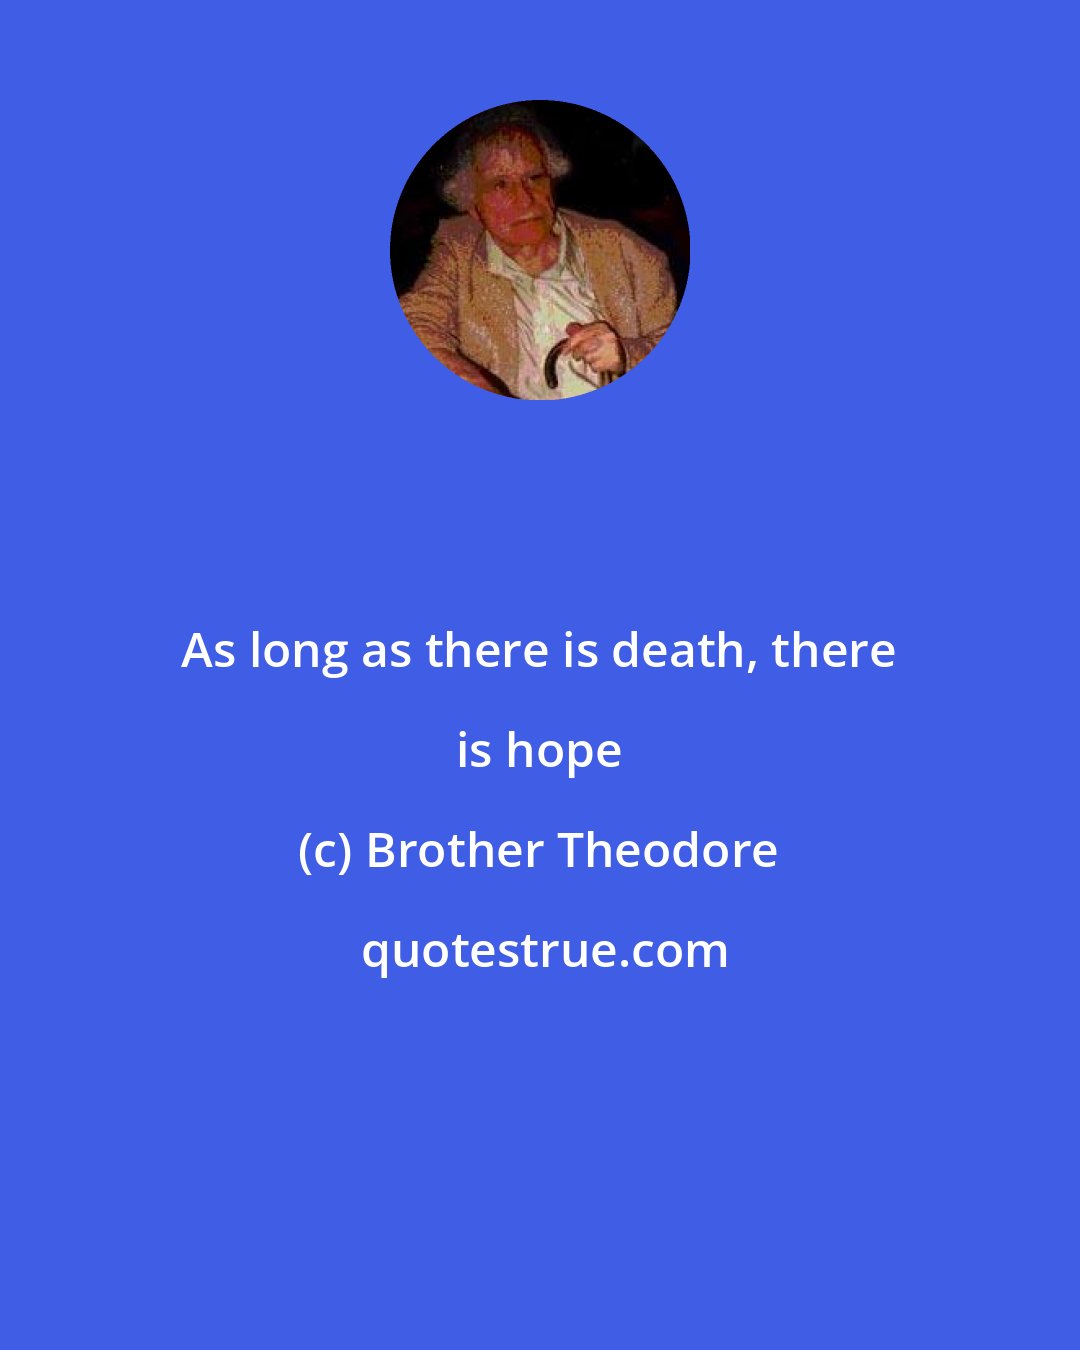 Brother Theodore: As long as there is death, there is hope